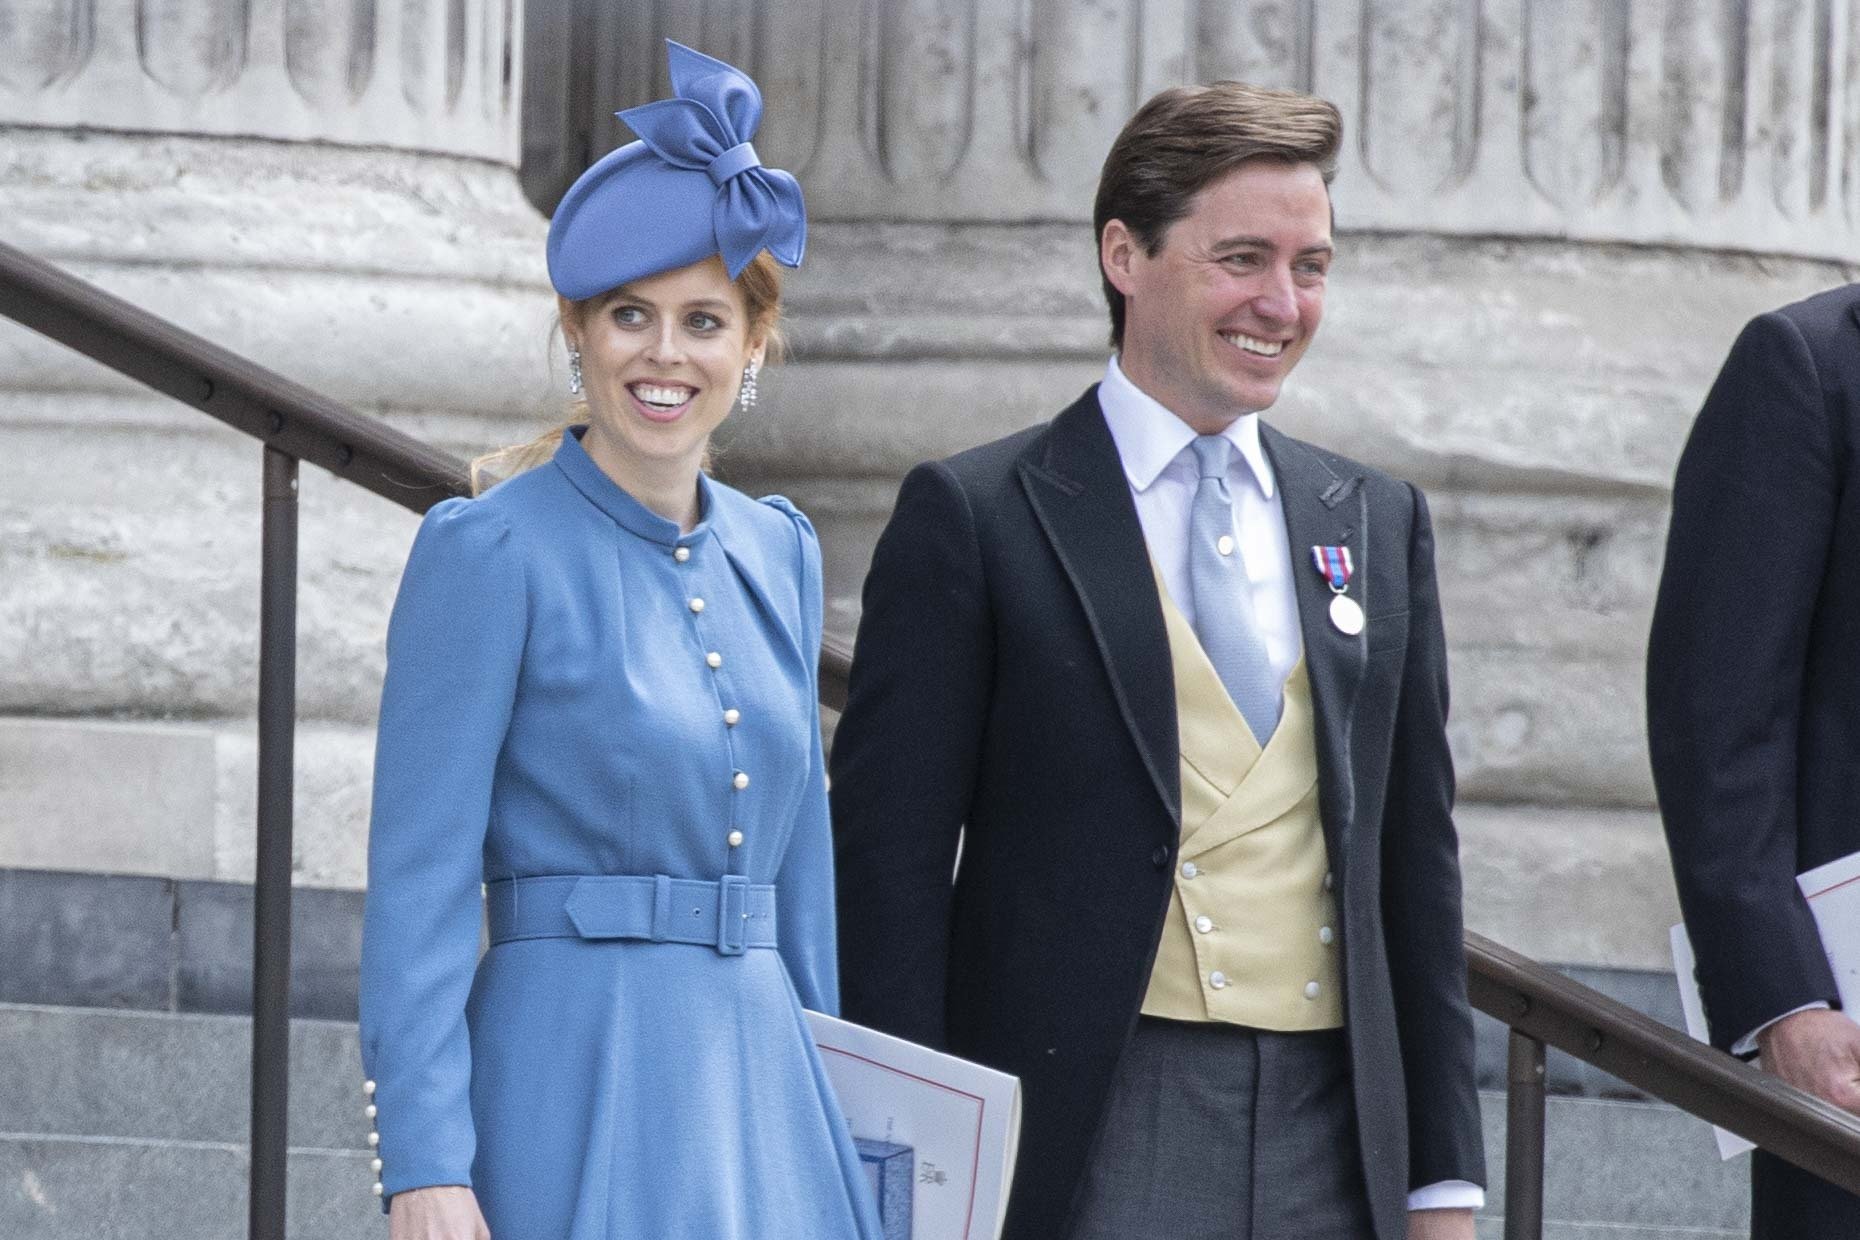 Princess Beatrice and Edoardo Mapelli Mozzi attend the National Service of Thanksgiving at St. Paul's Cathedral on June 03, 2022 in London, England.  |  Source: Getty Images